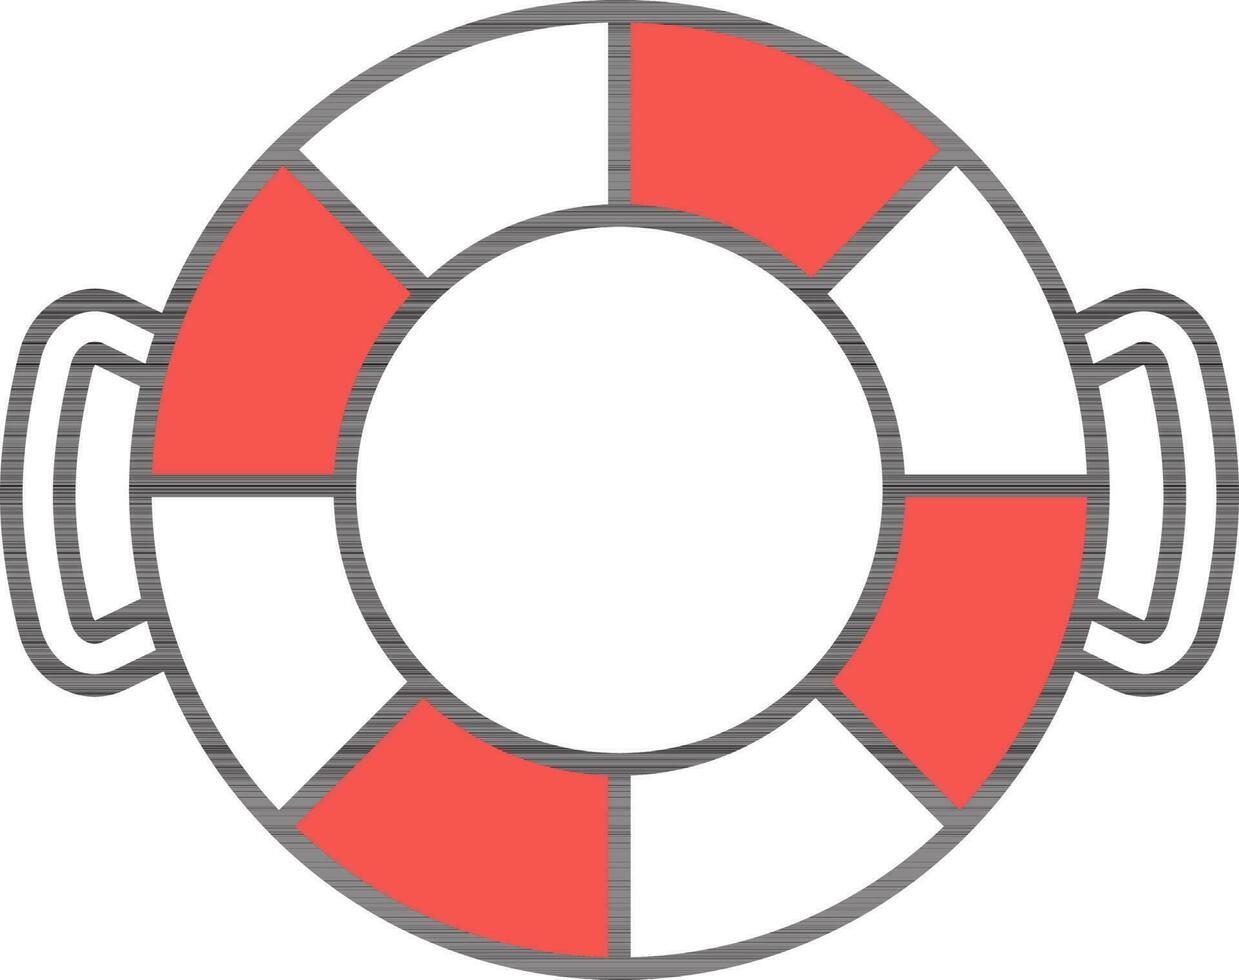 Lifebuoy Icon In Red And White Color. vector